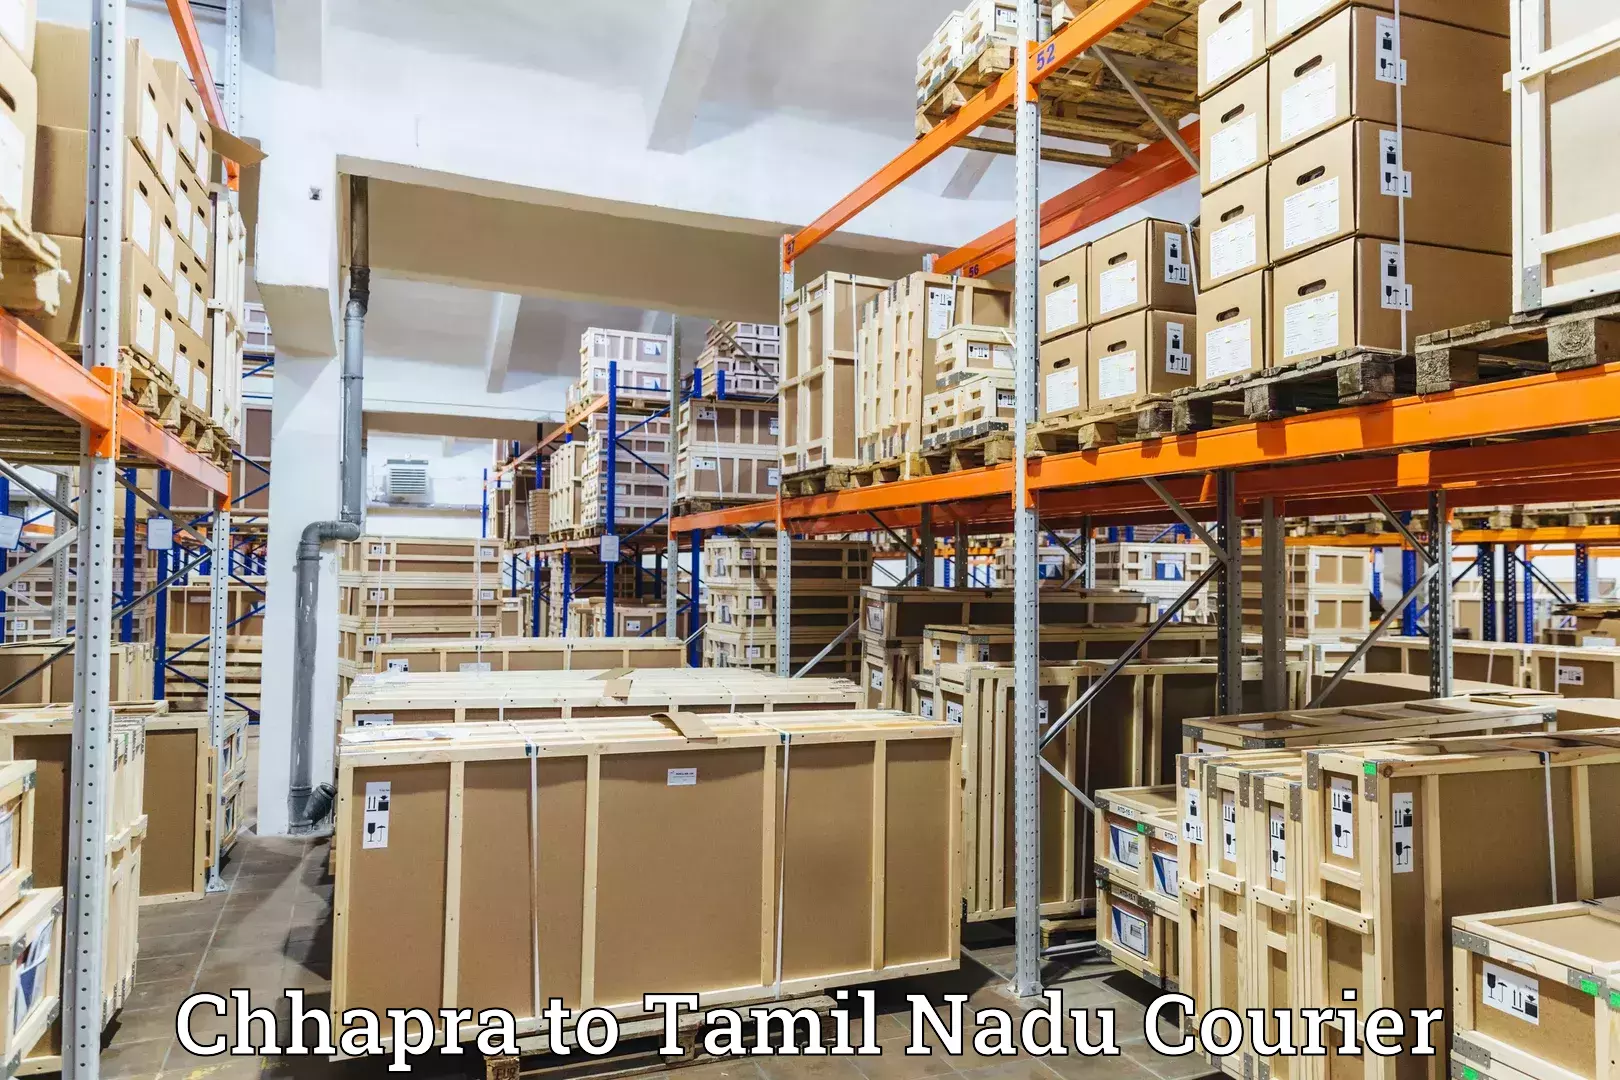 Rapid shipping services Chhapra to Vellore Institute of Technology